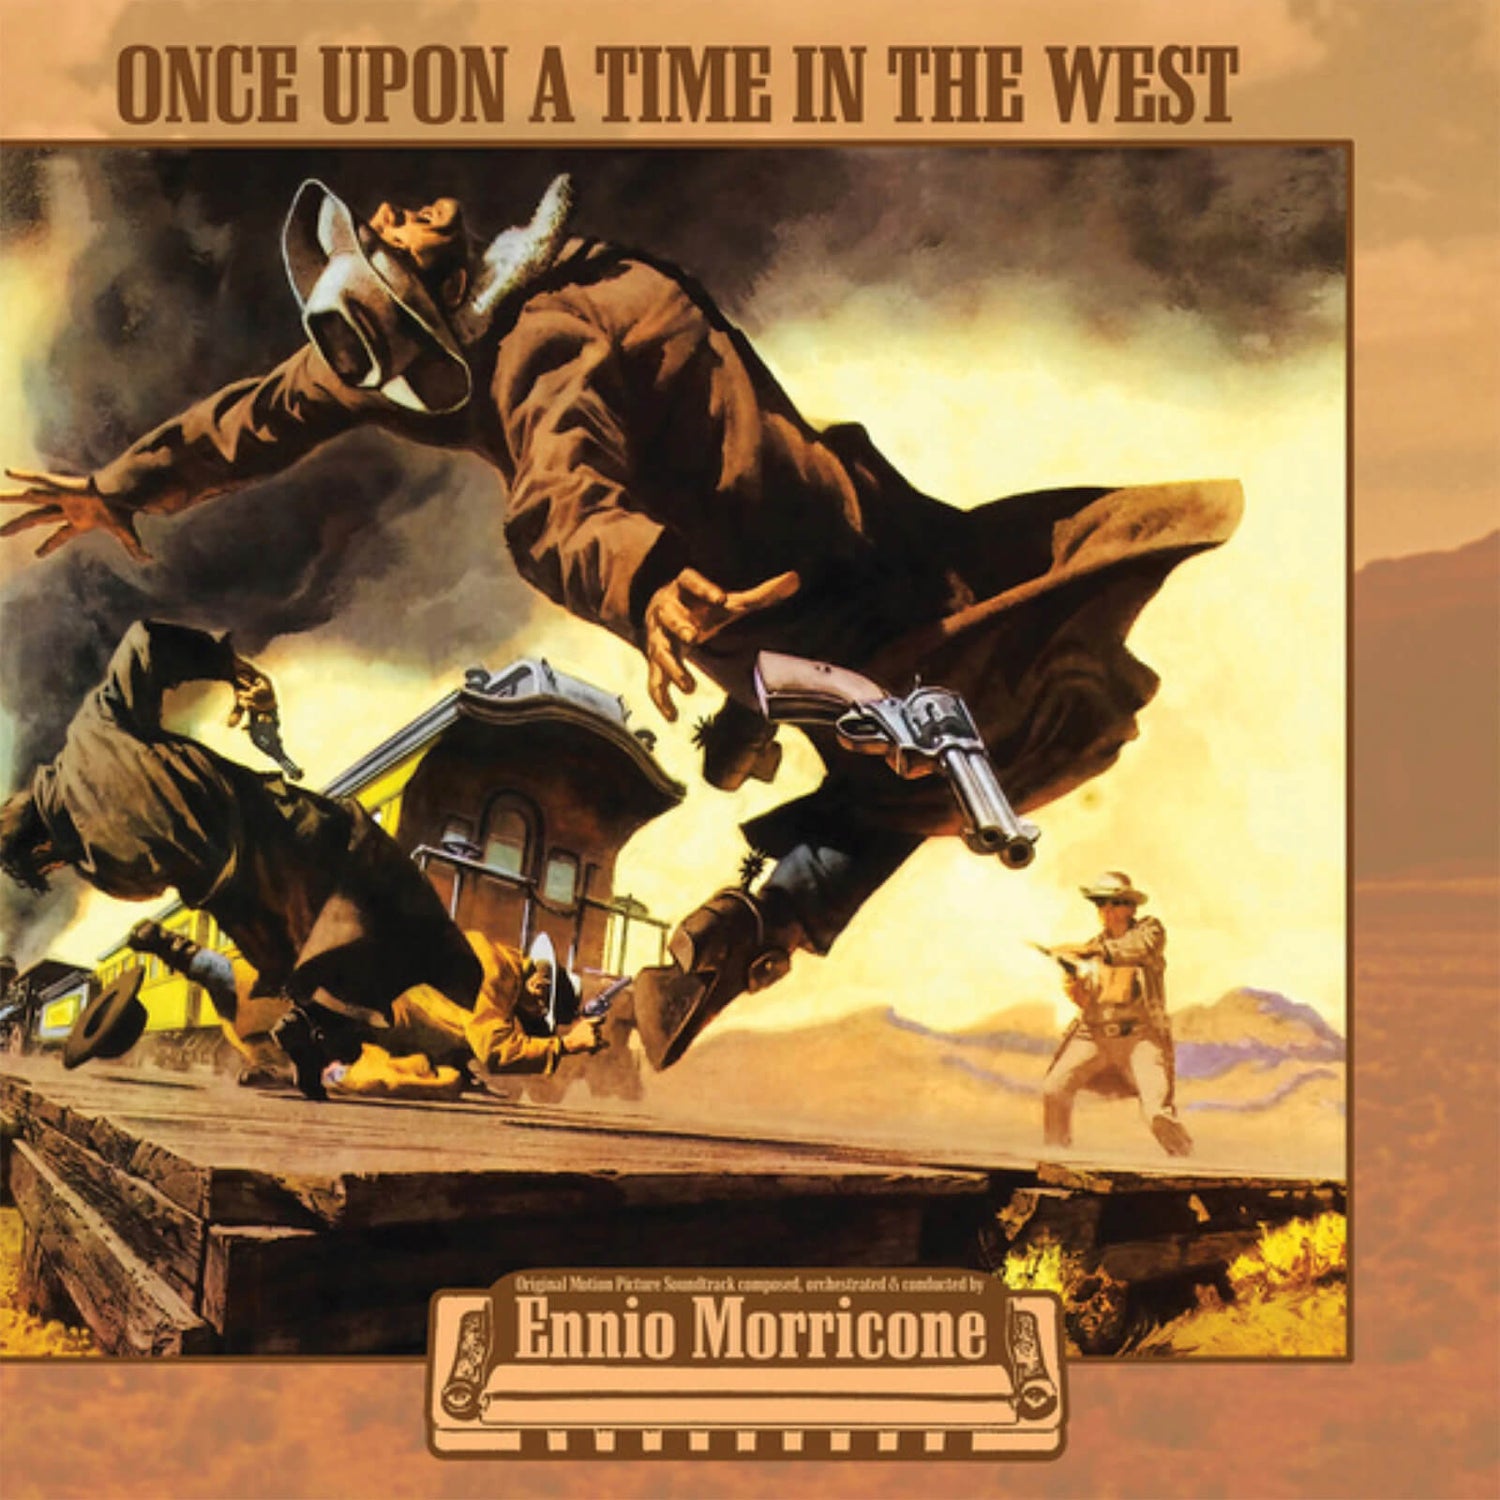 Ennio Morricone - Once Upon A Time In The West Vinyl